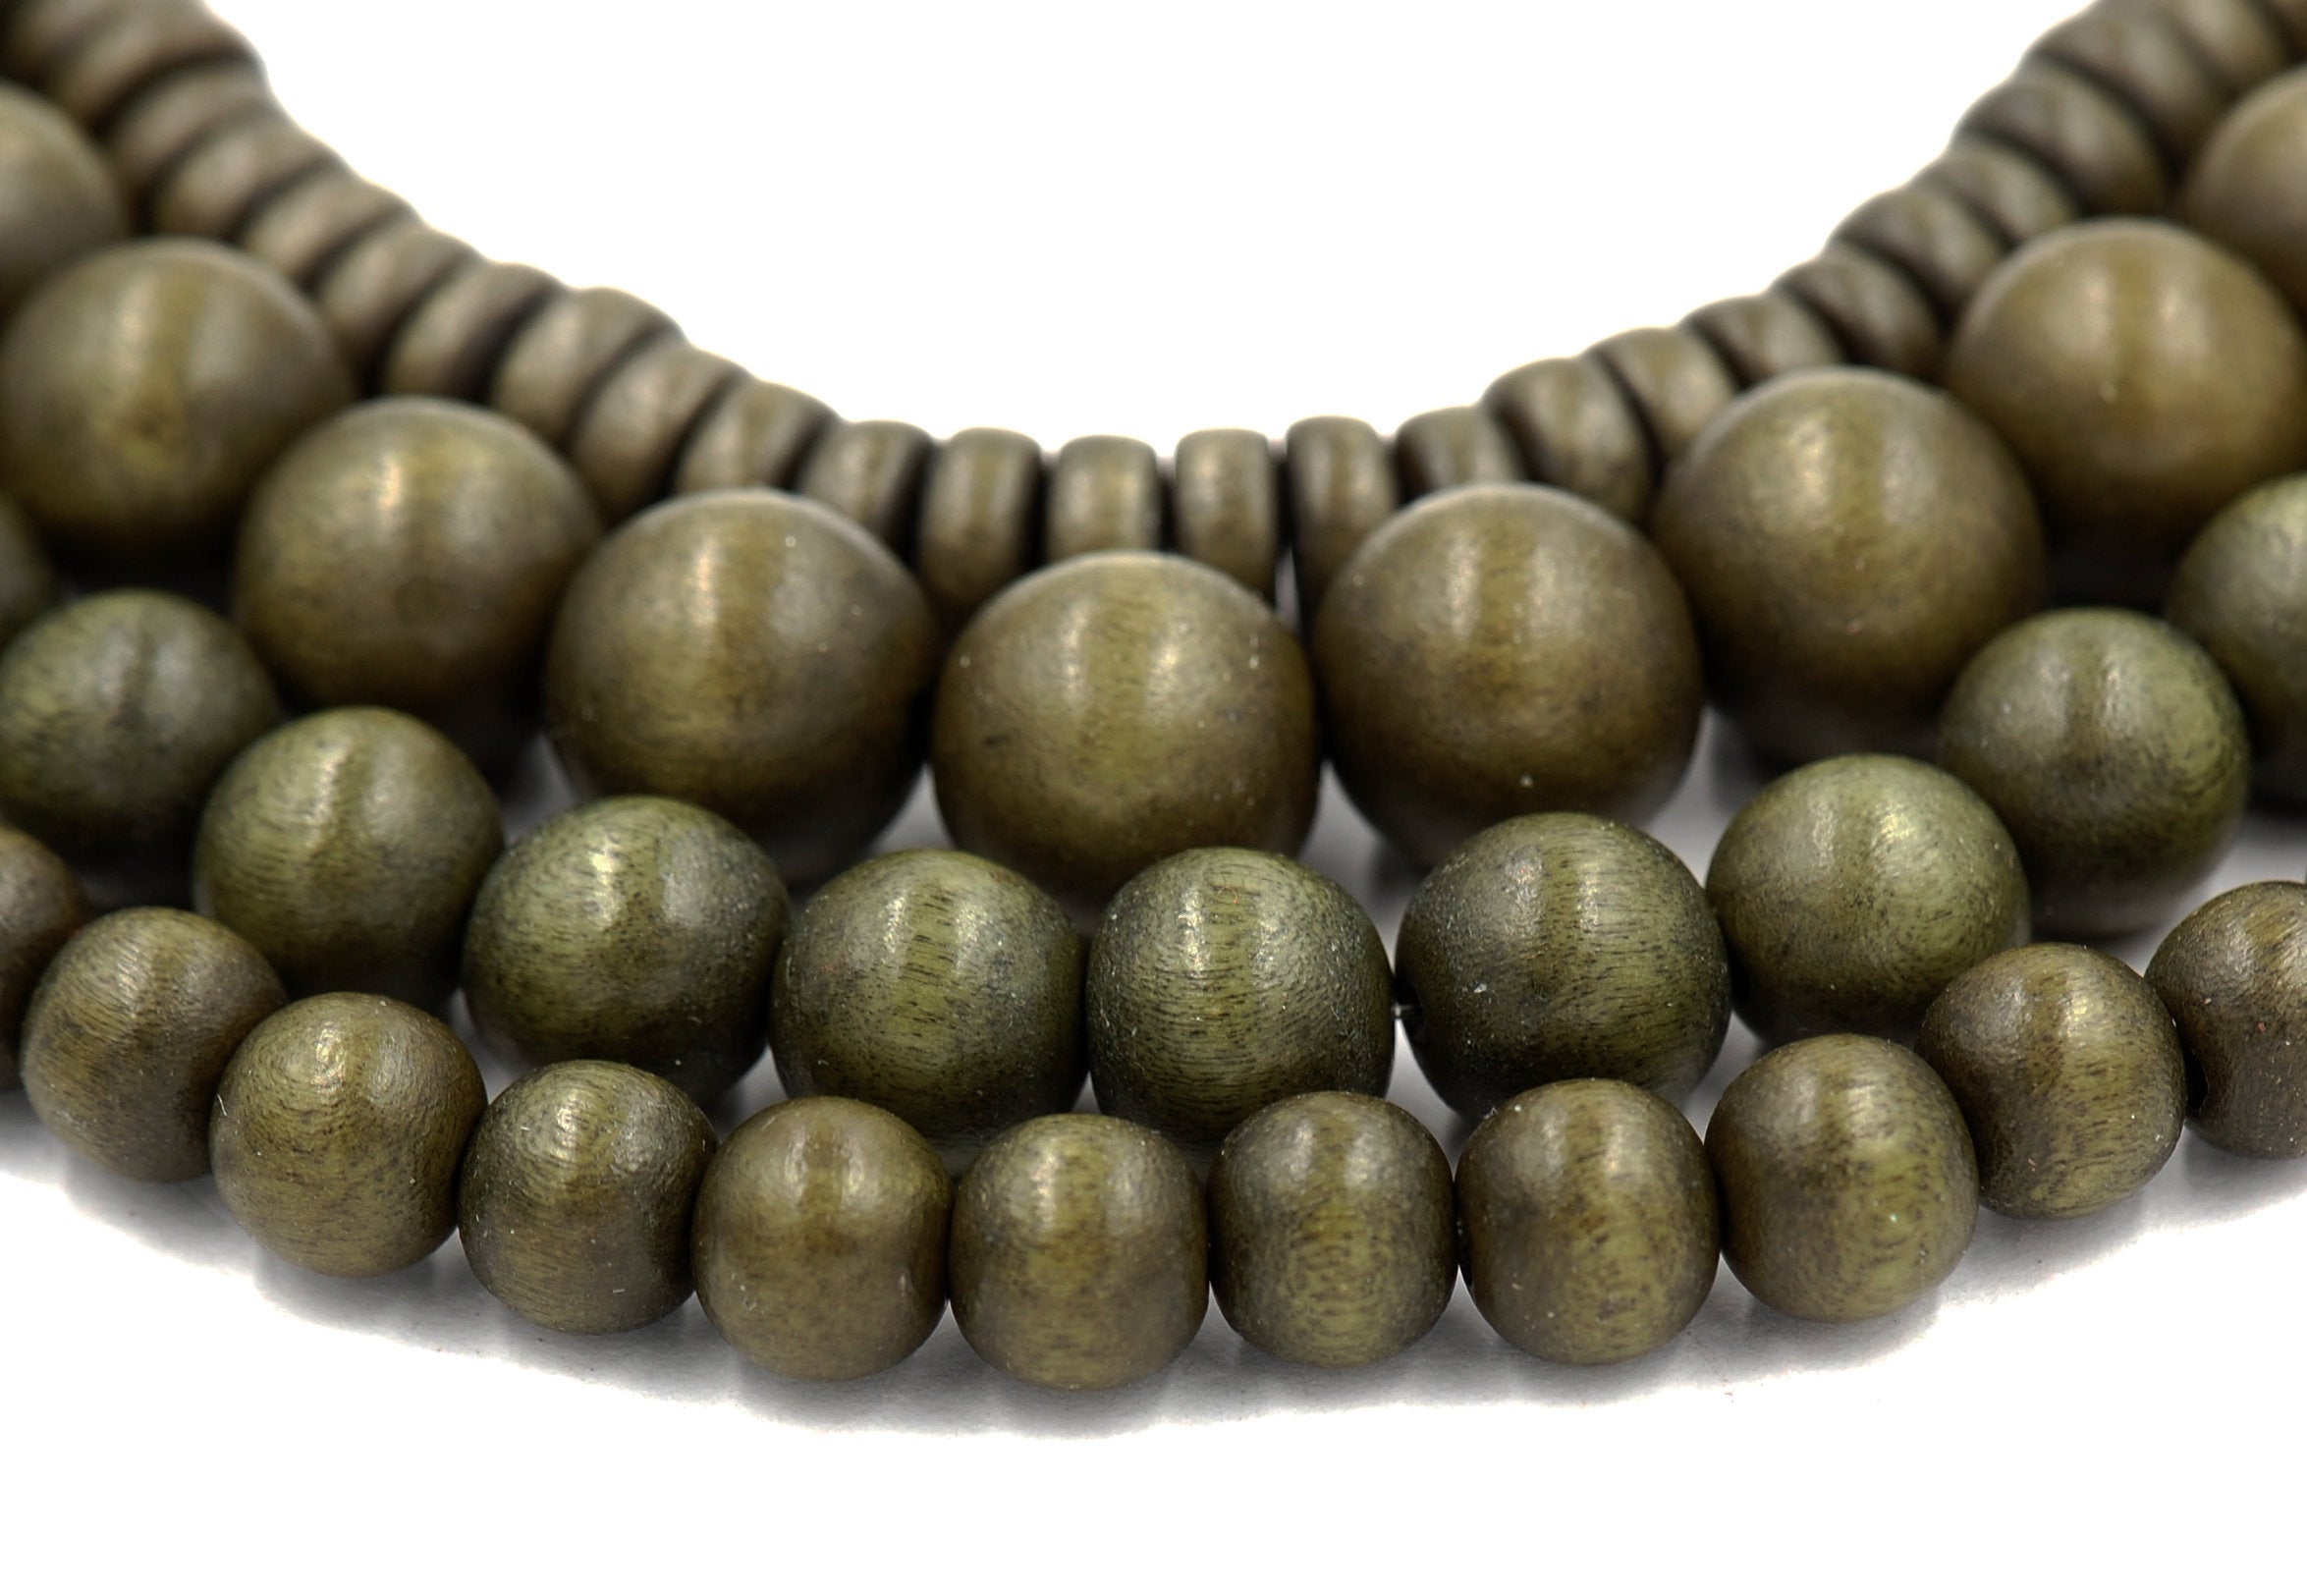 Olive Green Washed Wood 8mm, 10mm, 12mm, Rondelle 8x4mm, Green Rondelle Earth Boho Round Wood Beads -16 inch strand